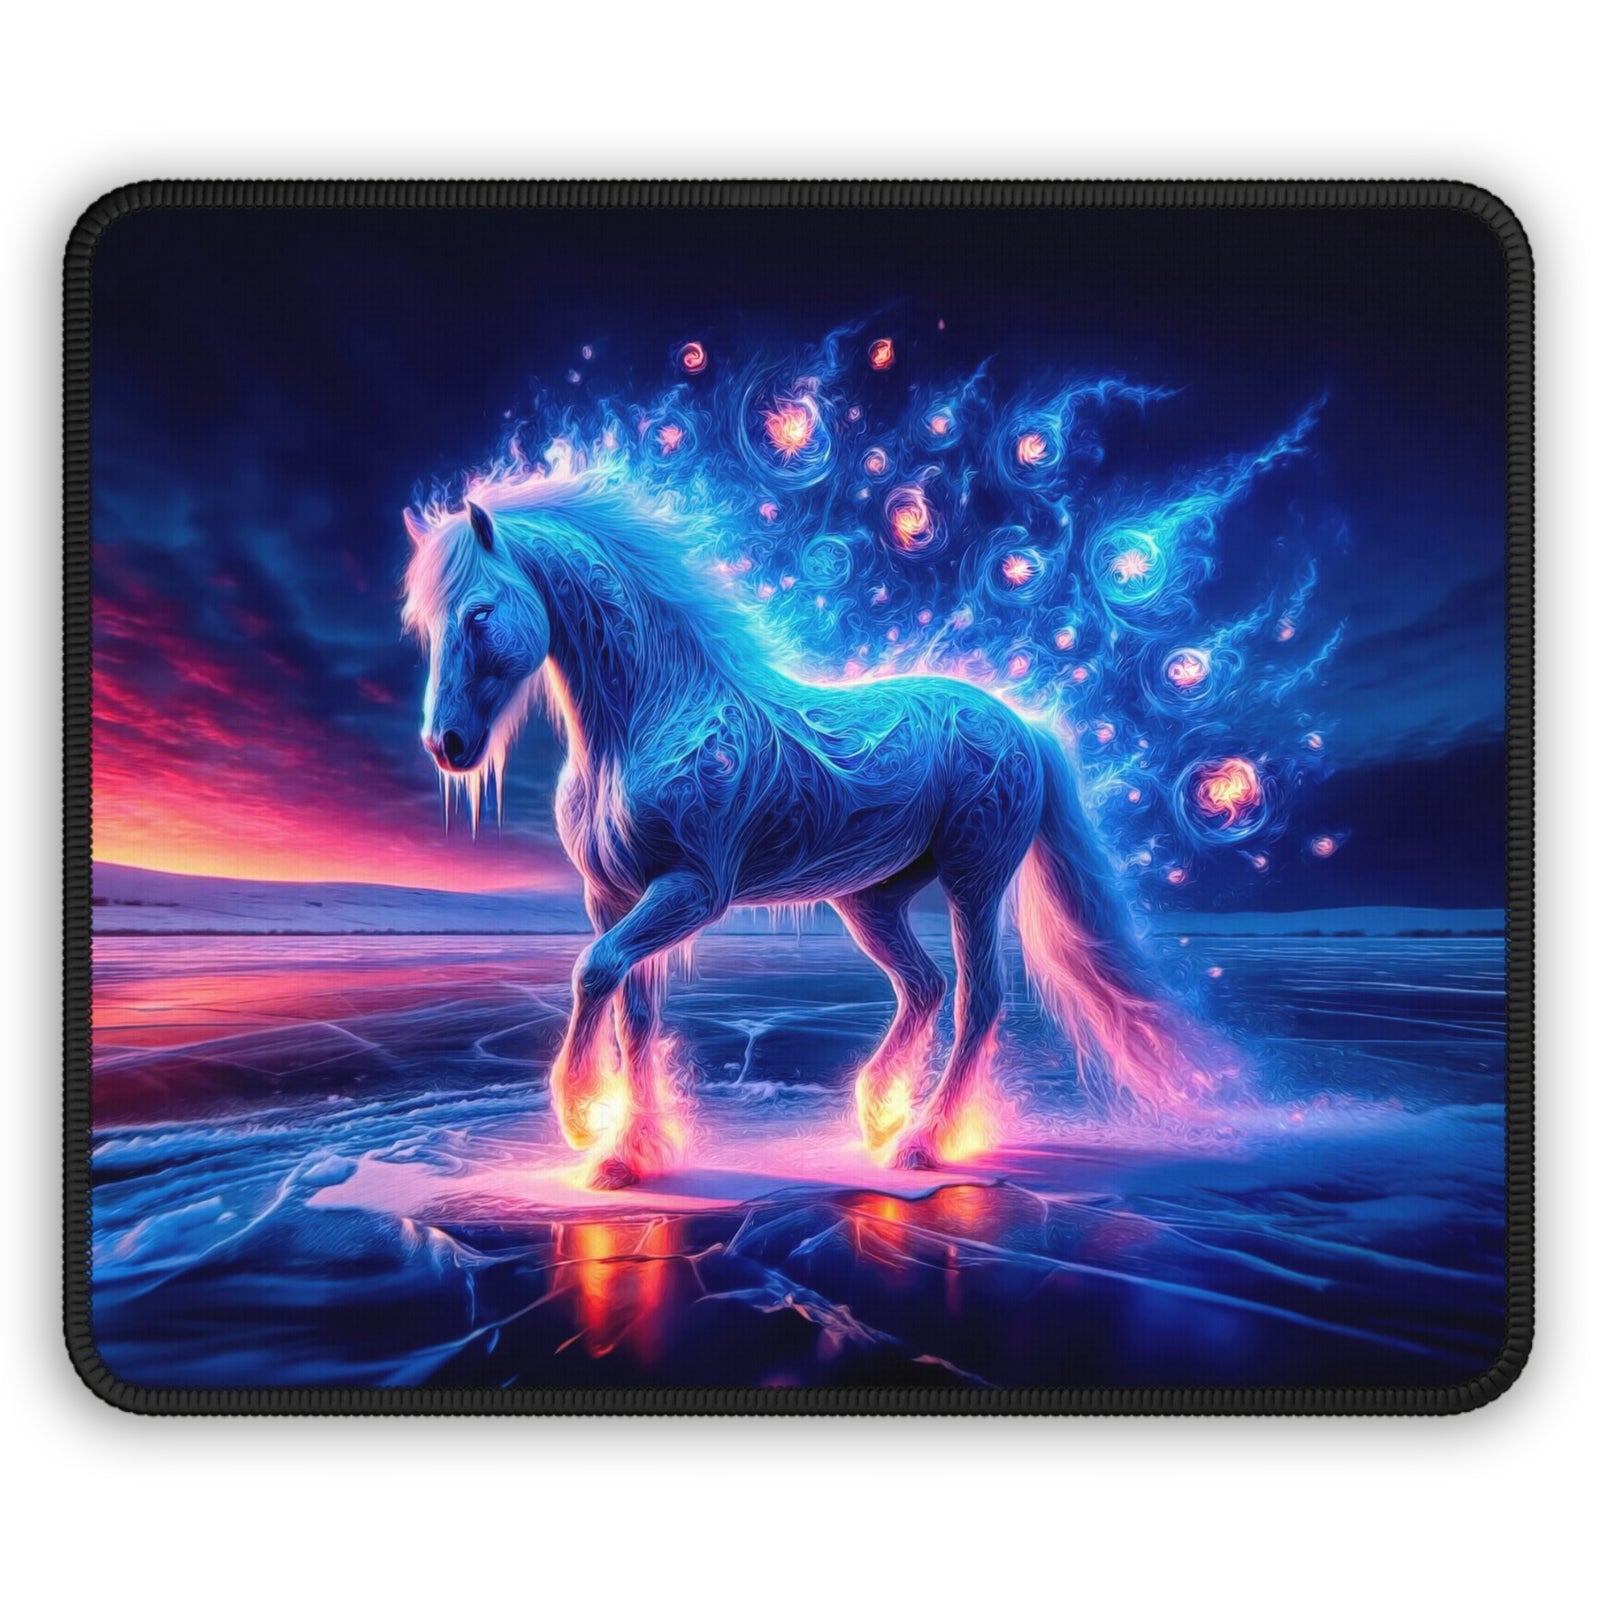 The Icicle-Maned Myth Gaming Mouse Pad